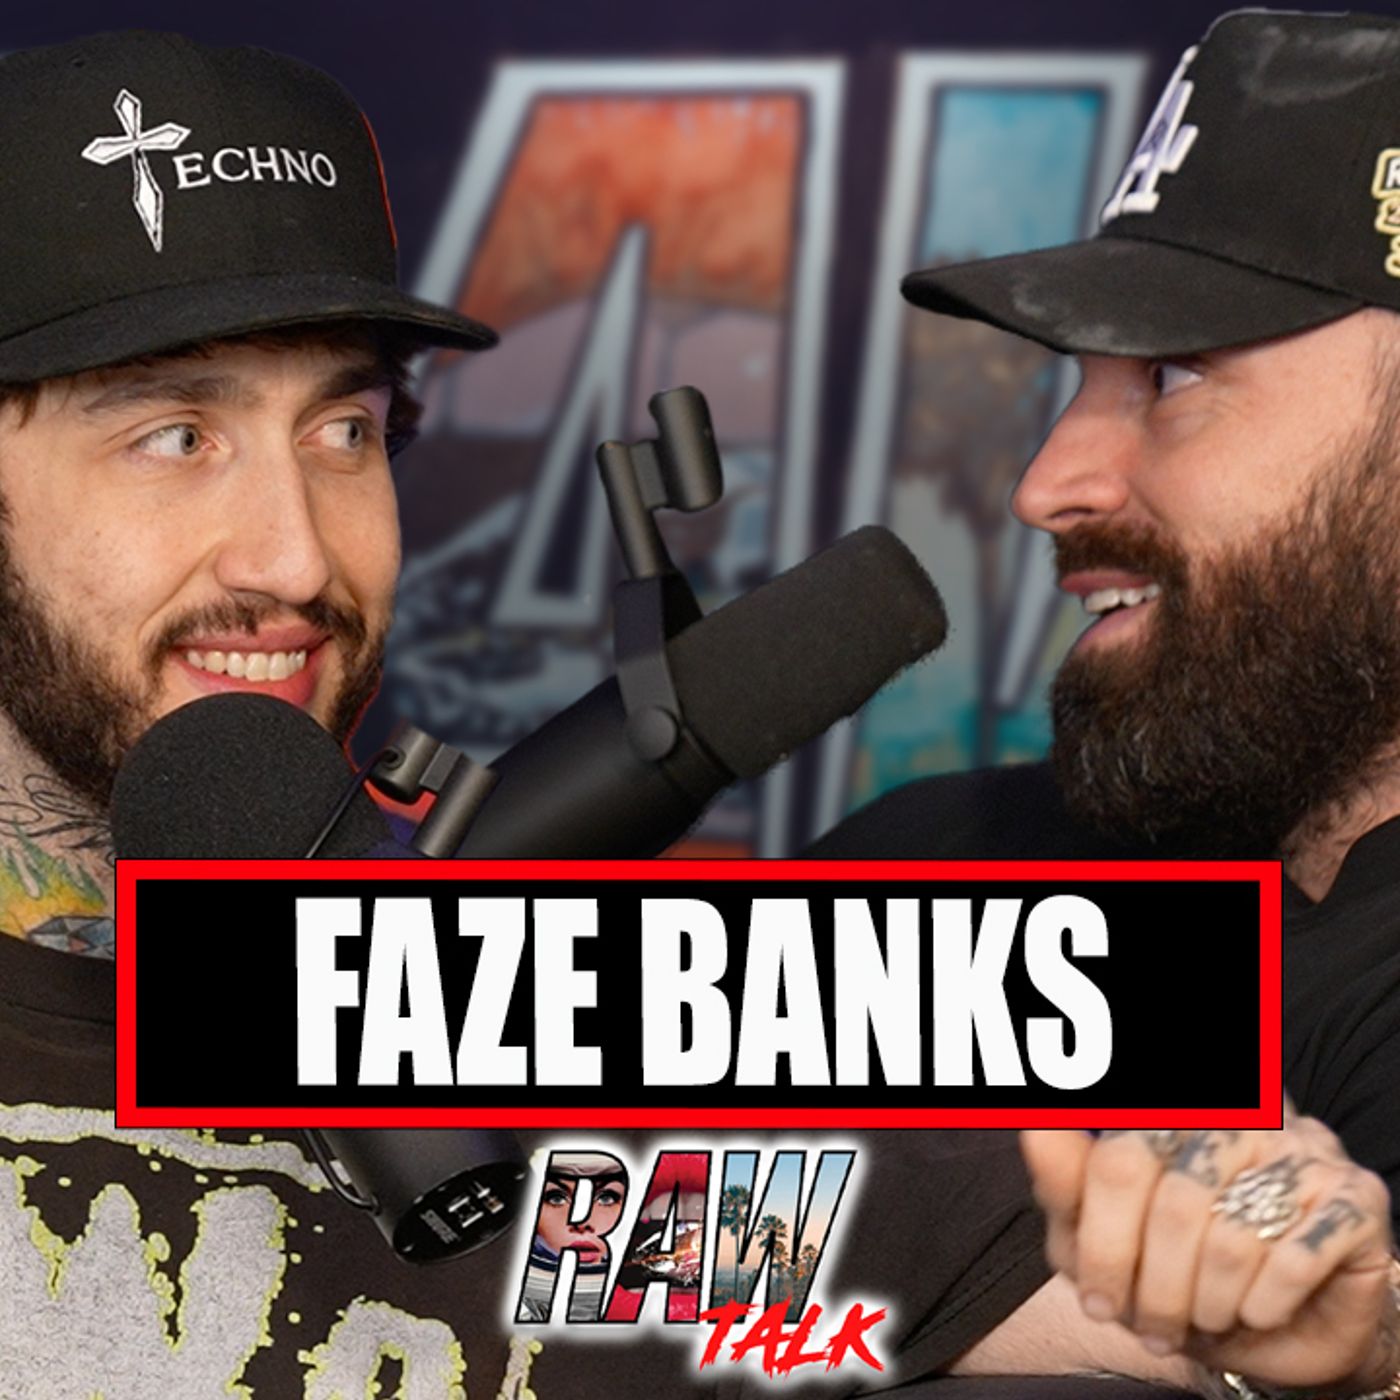 Banks tells the TRUTH about FaZe Clan, losing his father, & a web3 Future